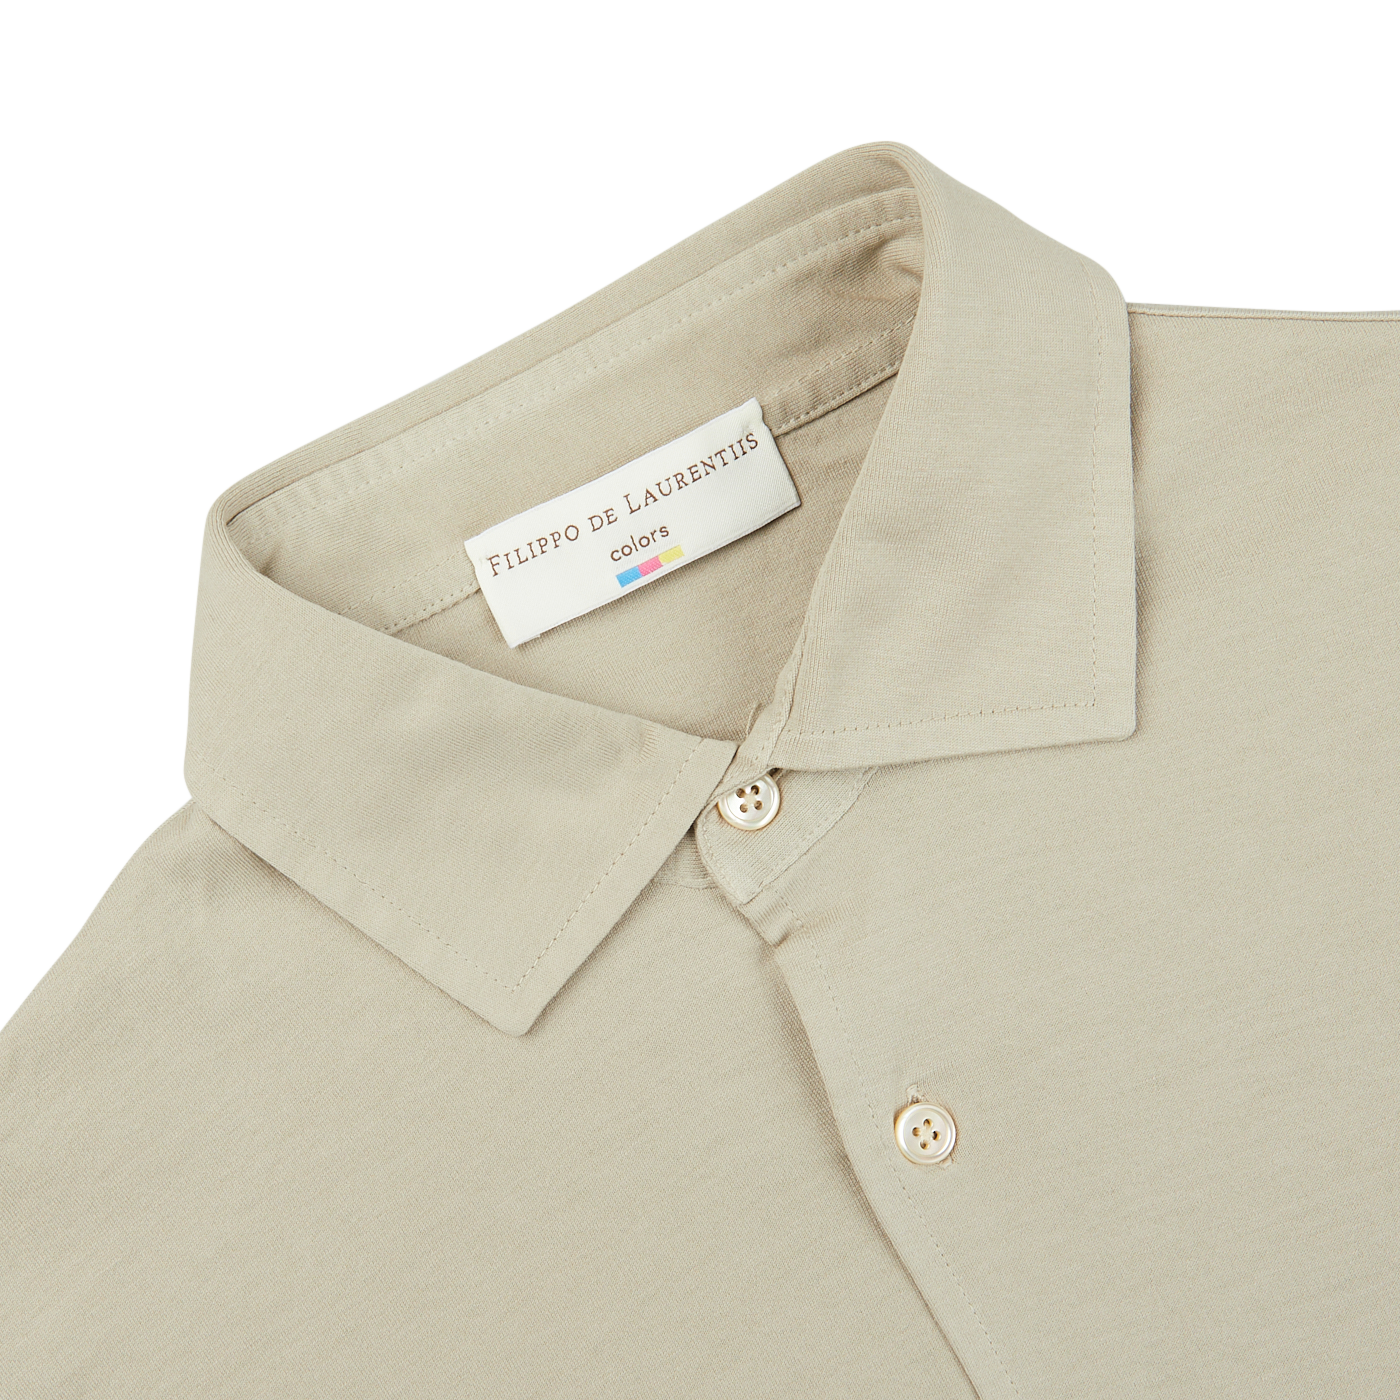 A Ciottollo Beige Cotton Jersey Knitted Shirt in pure cotton with a Filippo de Laurentiis label.